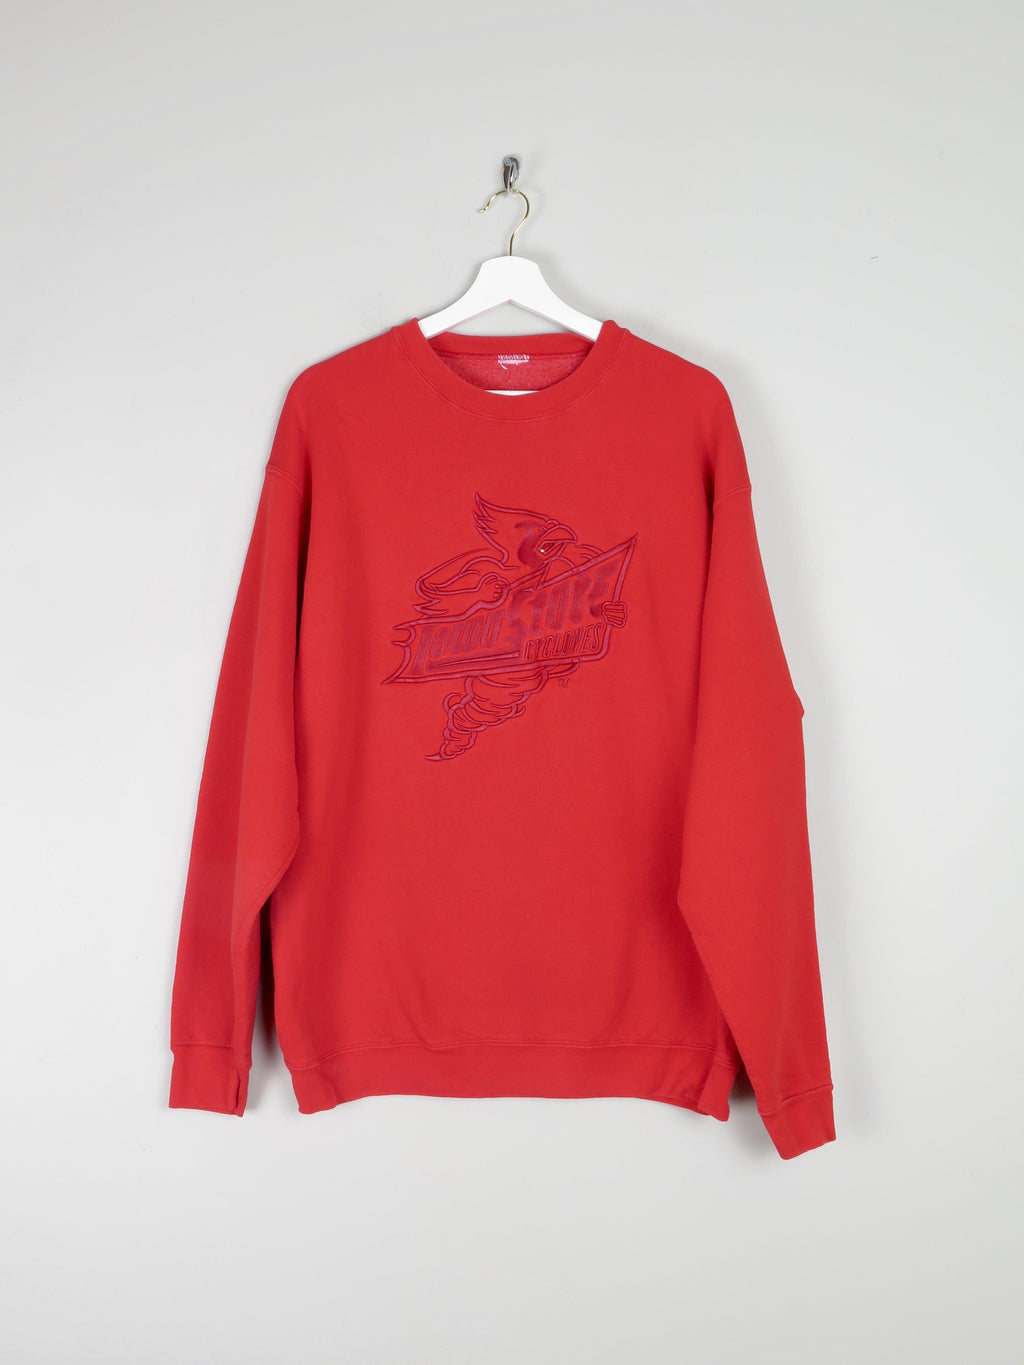 Men's Red Sweatshirt With Embroidered Logo L - The Harlequin